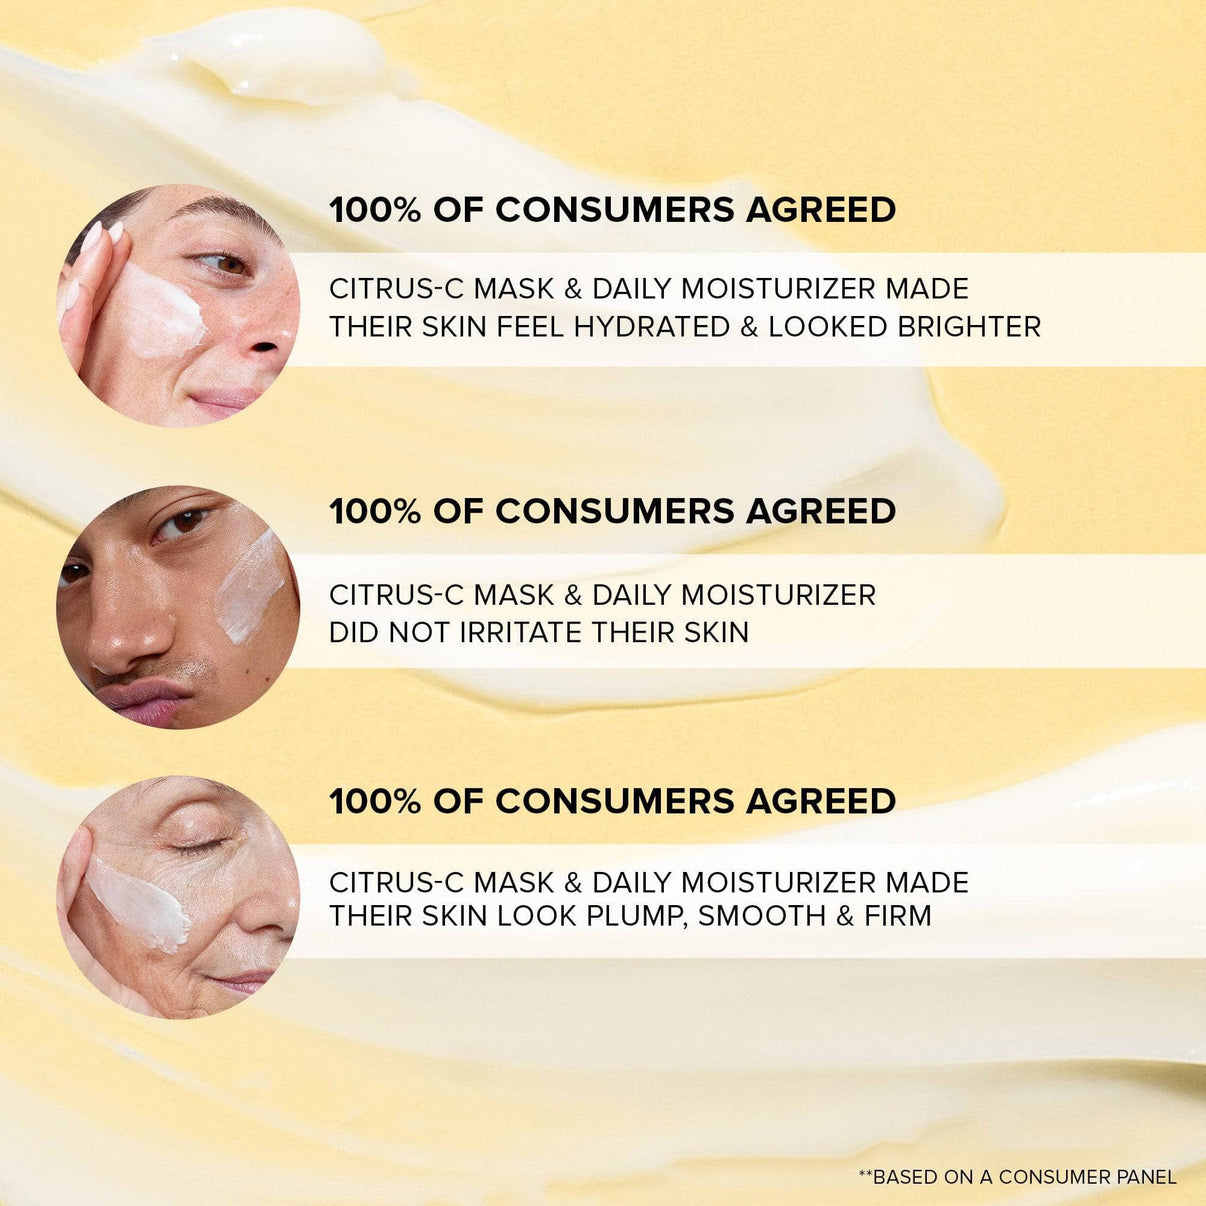 Consumer claims after wearing Citrus-C mask from Nude Basics Kit - 5